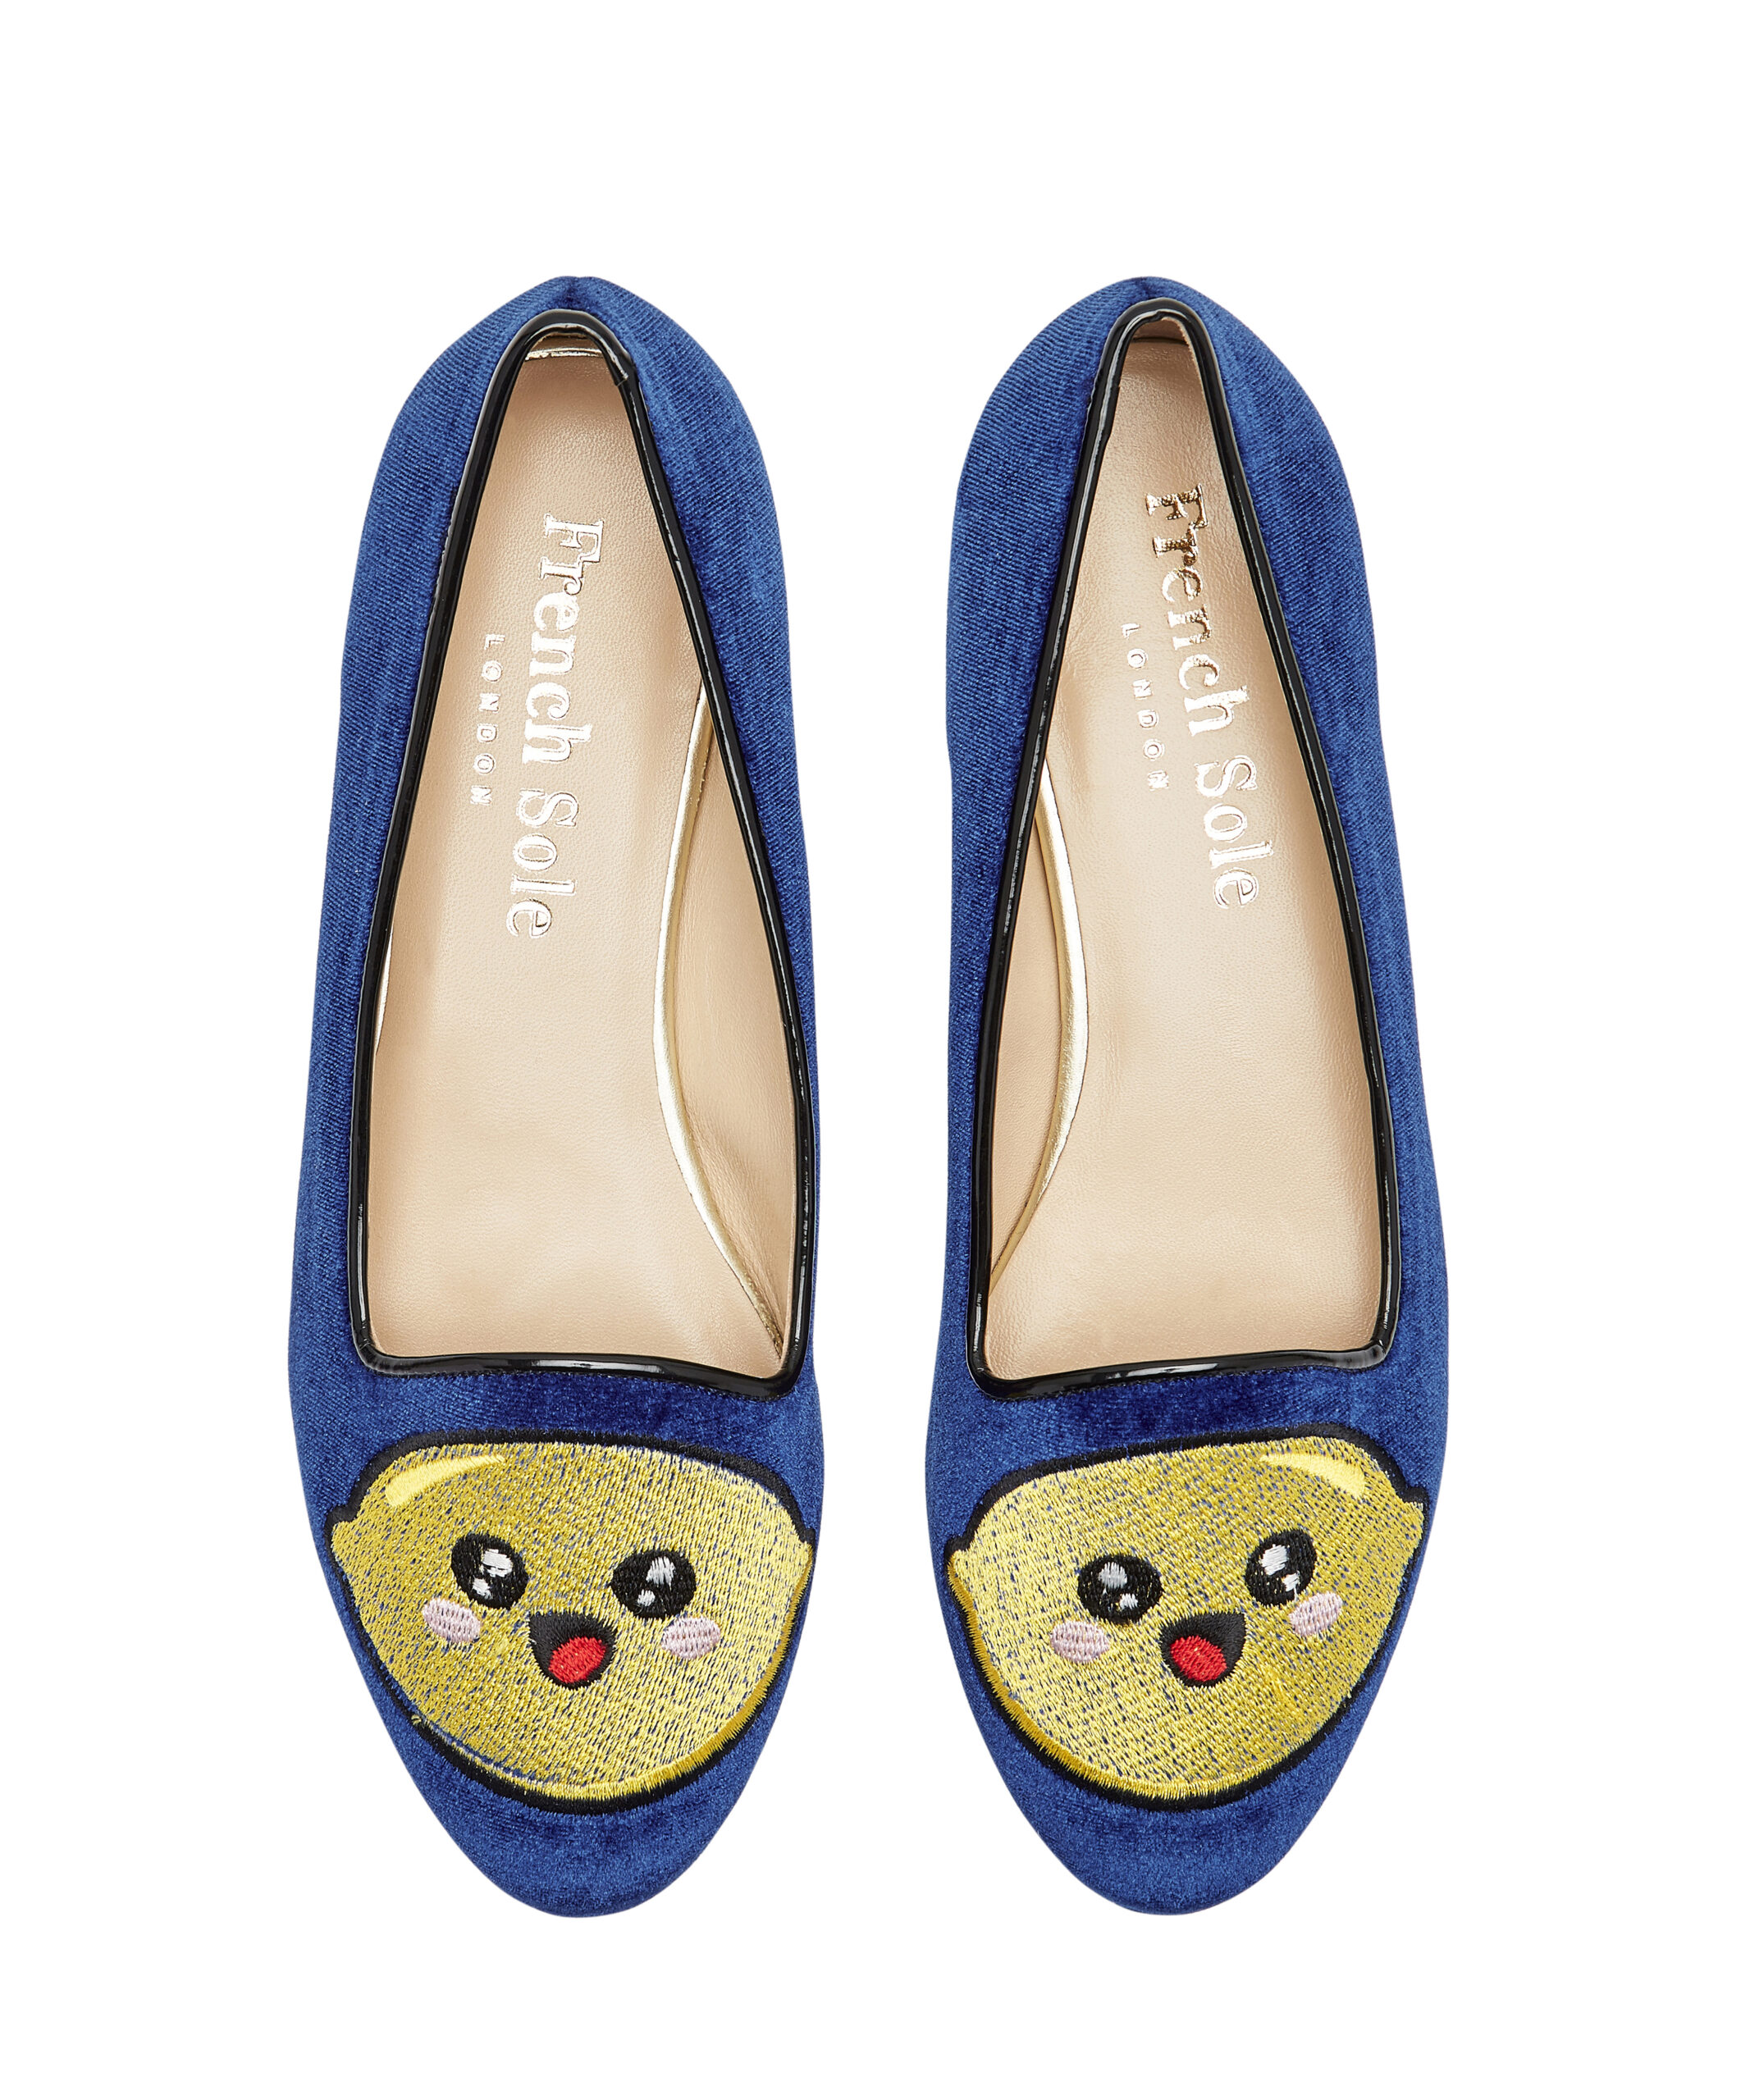 french sole slippers